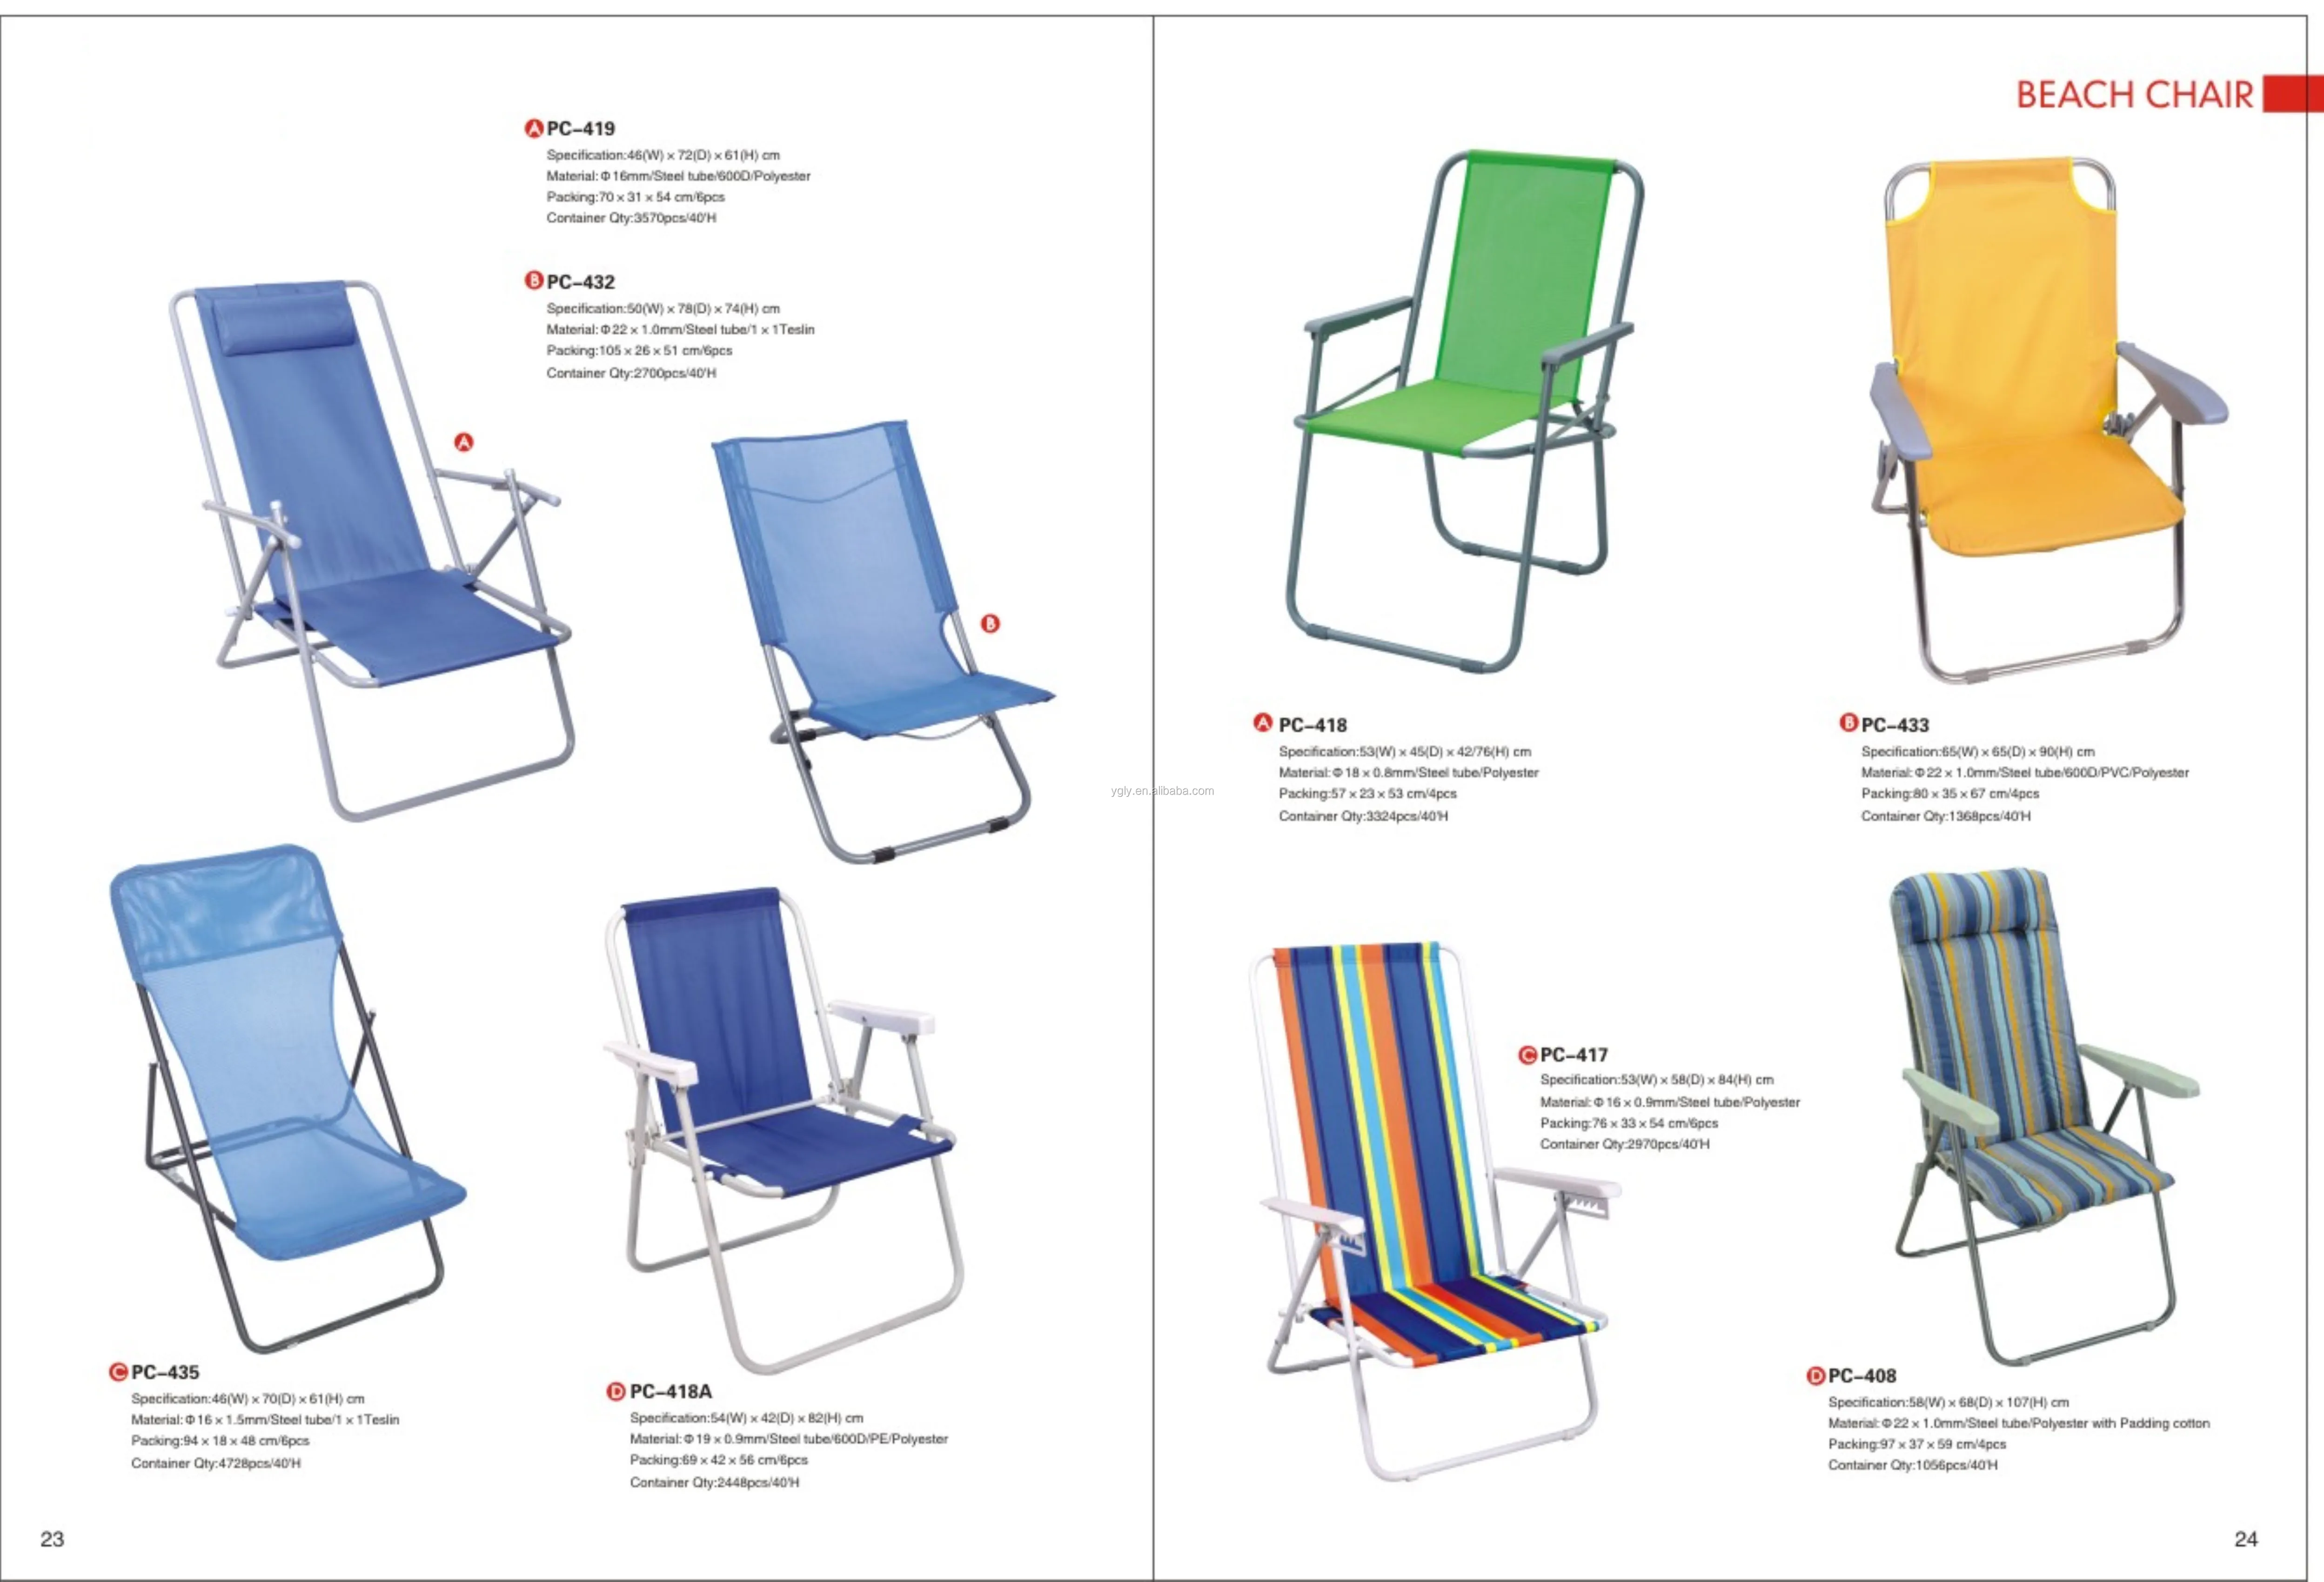 Aldi Folding Chair Cheapest Beach Metal Leisure Relax Folding Chair Cheap Metal Folding Chairs Target Folding Beach Chairs Buy Aldi Folding Chair Target Folding Beach Chairs Cheap Metal Folding Chairs Product On Alibaba Com